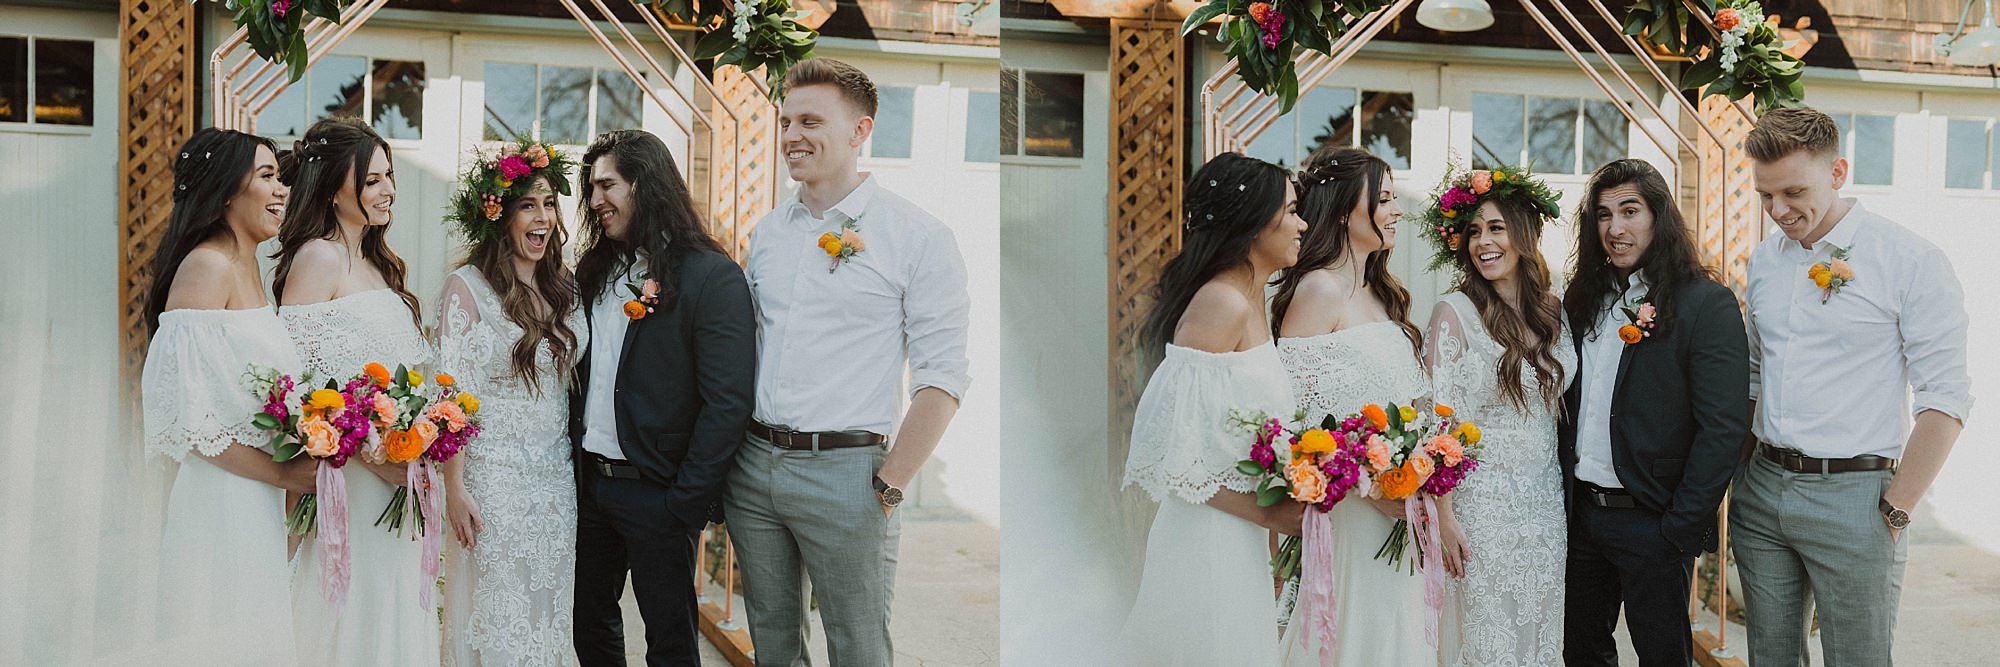 ToniGPhoto_Spanish_Colorful_Styled_Elopement11